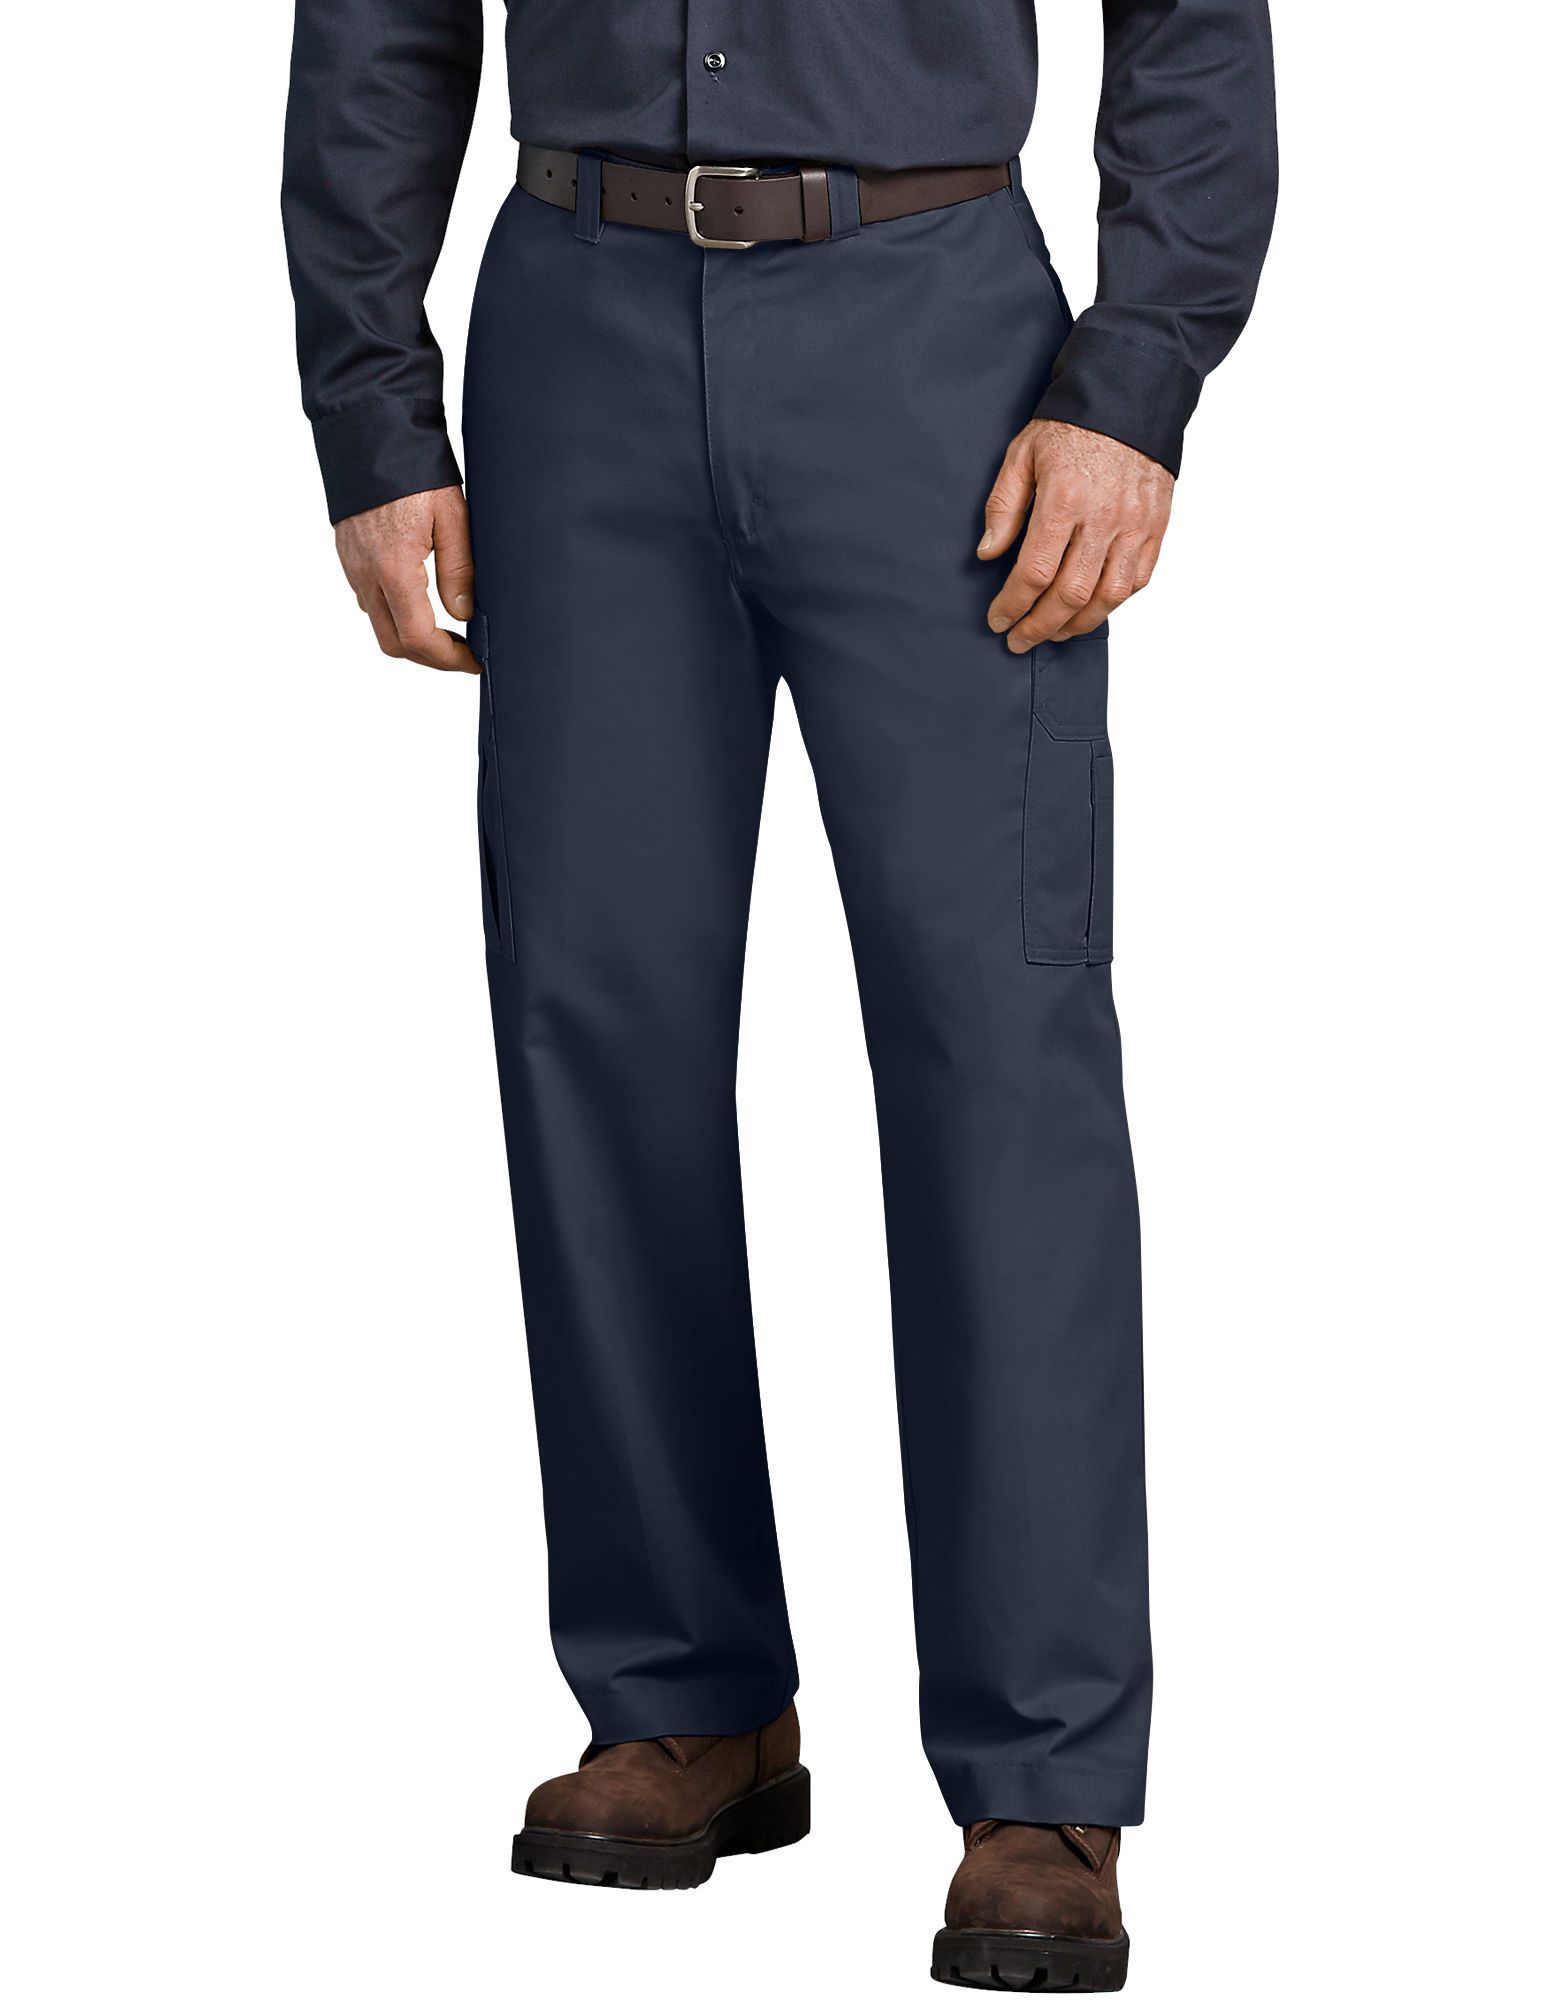 Buy Dickies Relaxed Fit Cargo Pant - Informational Use Only Online at ...